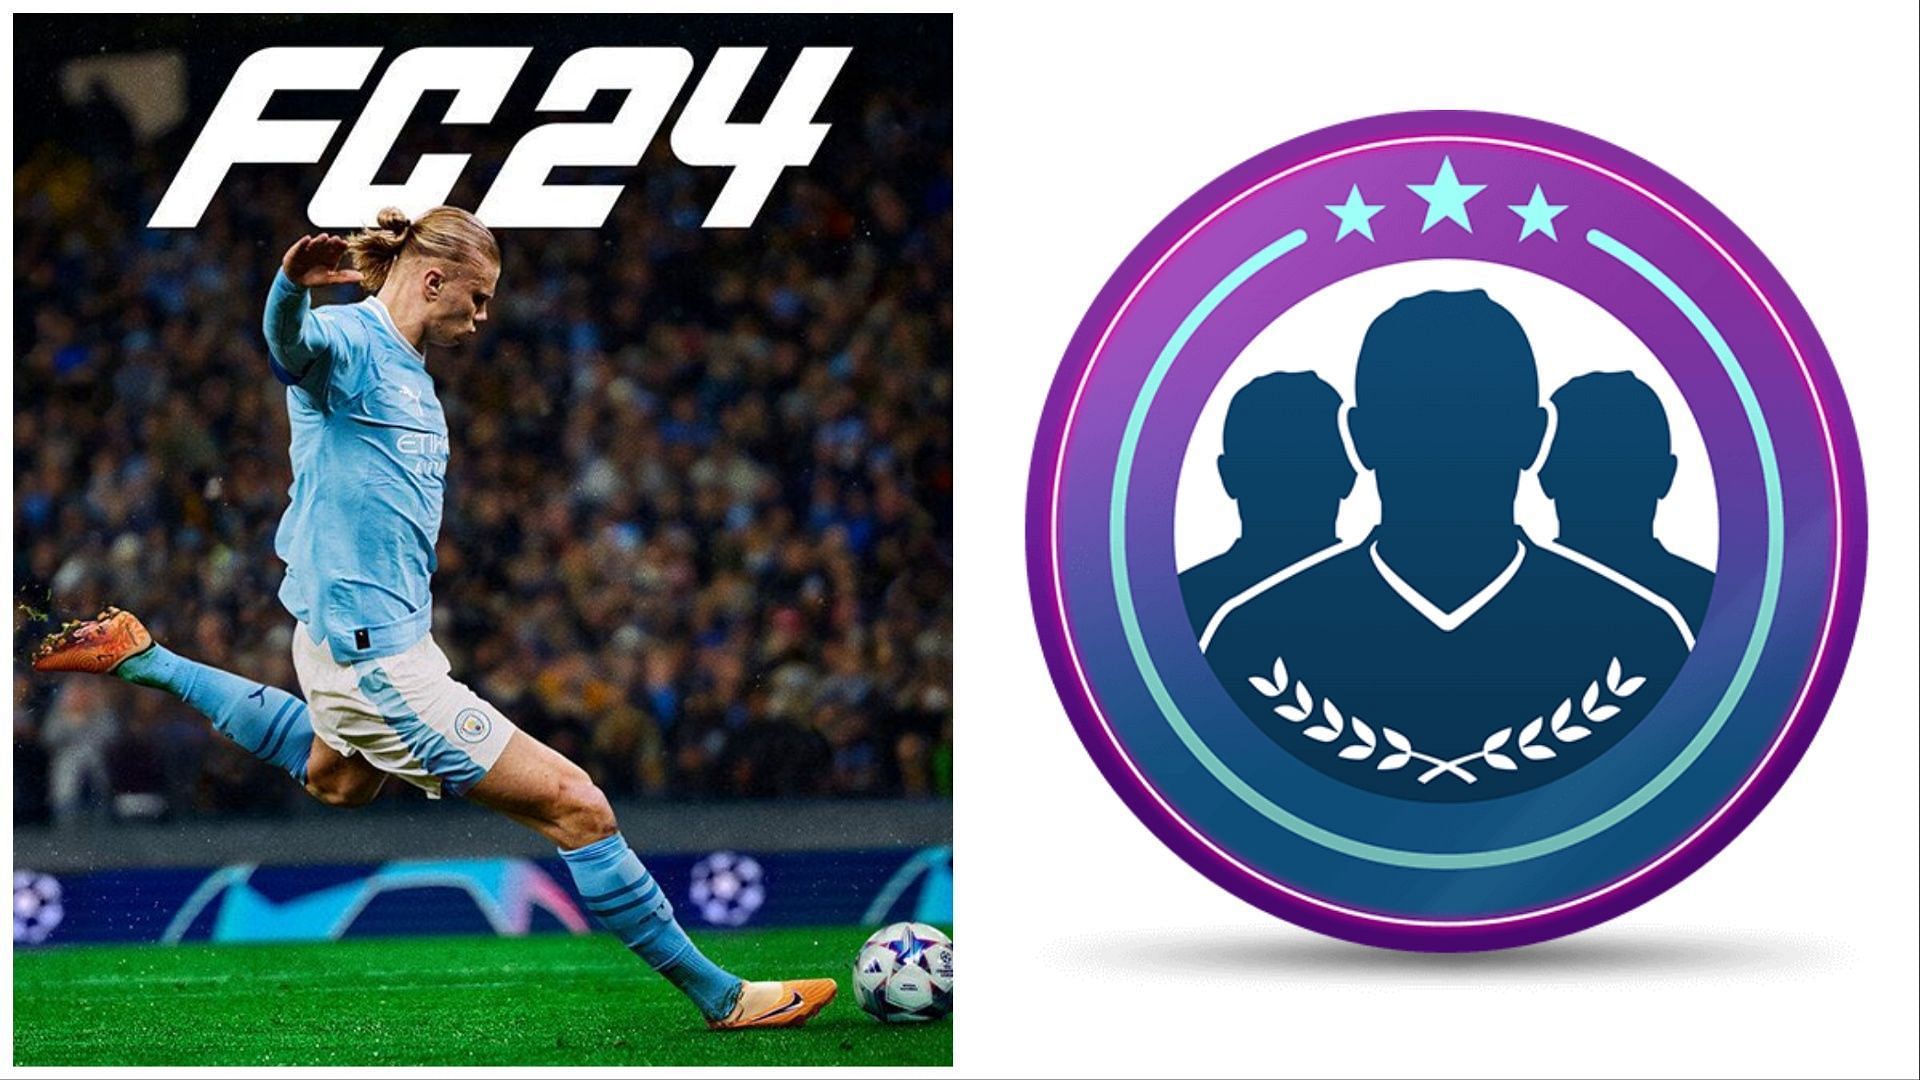 FIFA 21 Ultimate Team Web App LIVE: Release Date And Time, Sign-In